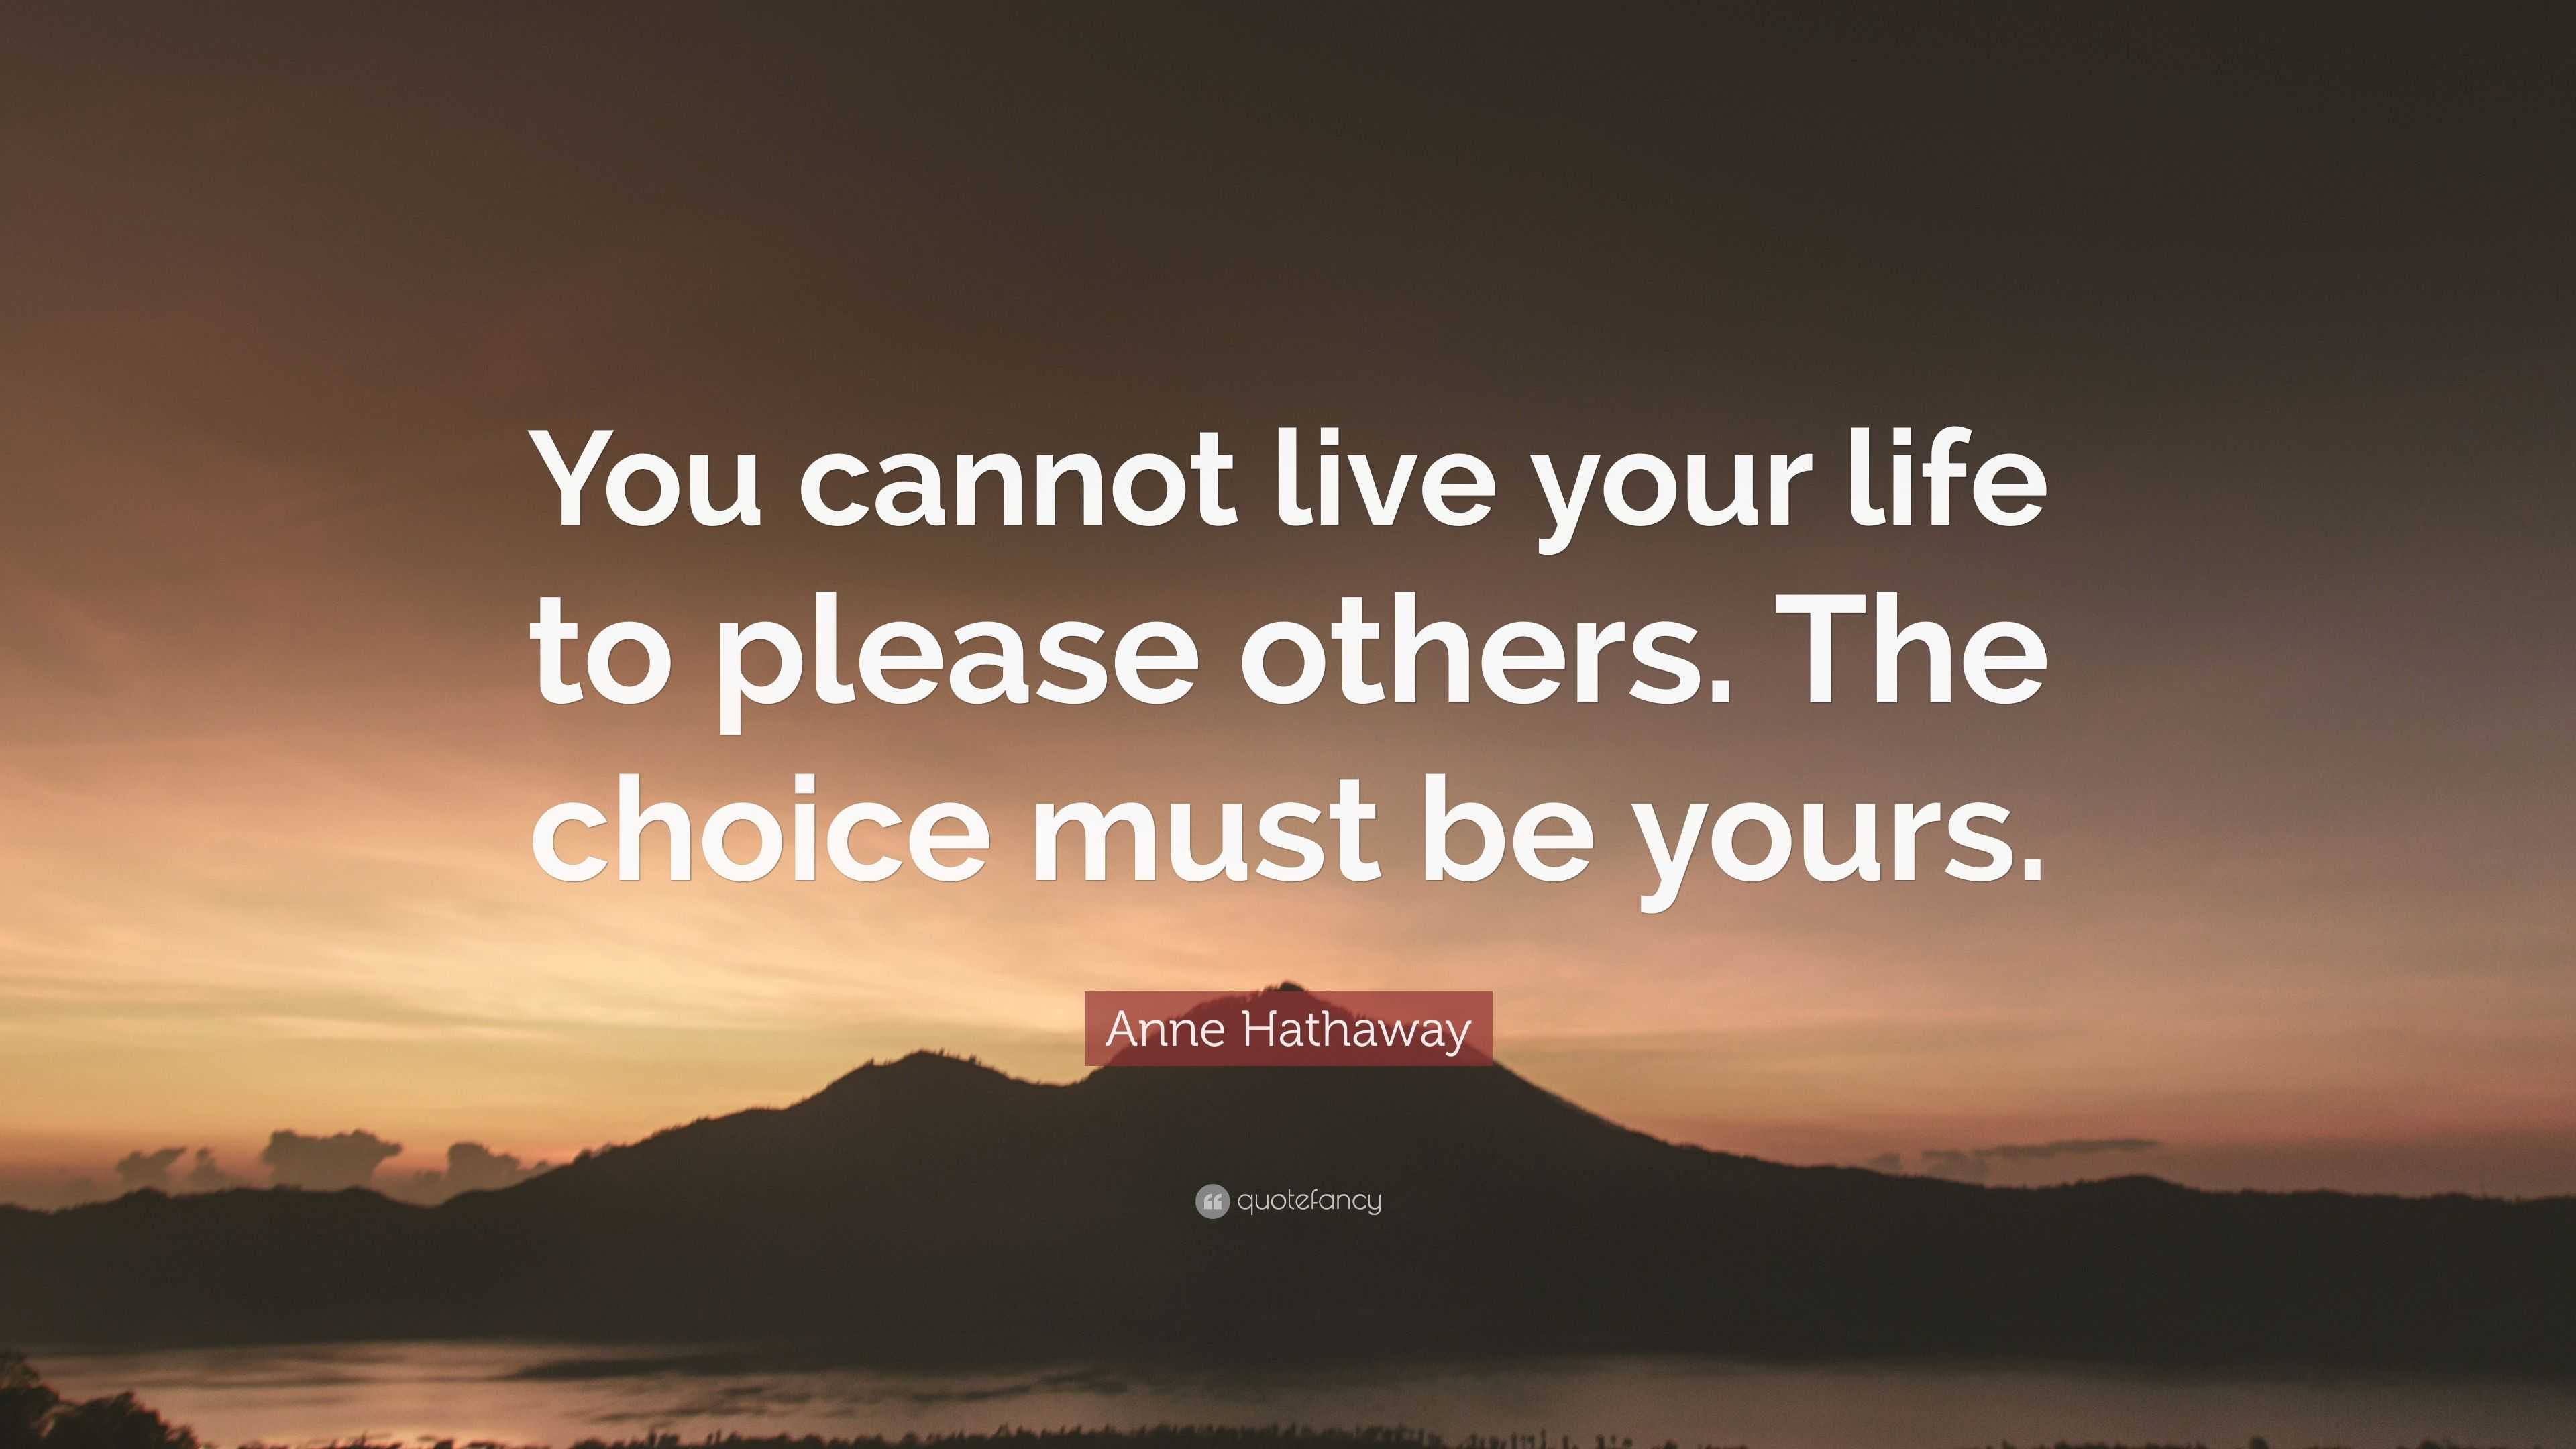 Anne Hathaway Quote “You cannot live your life to please others. The